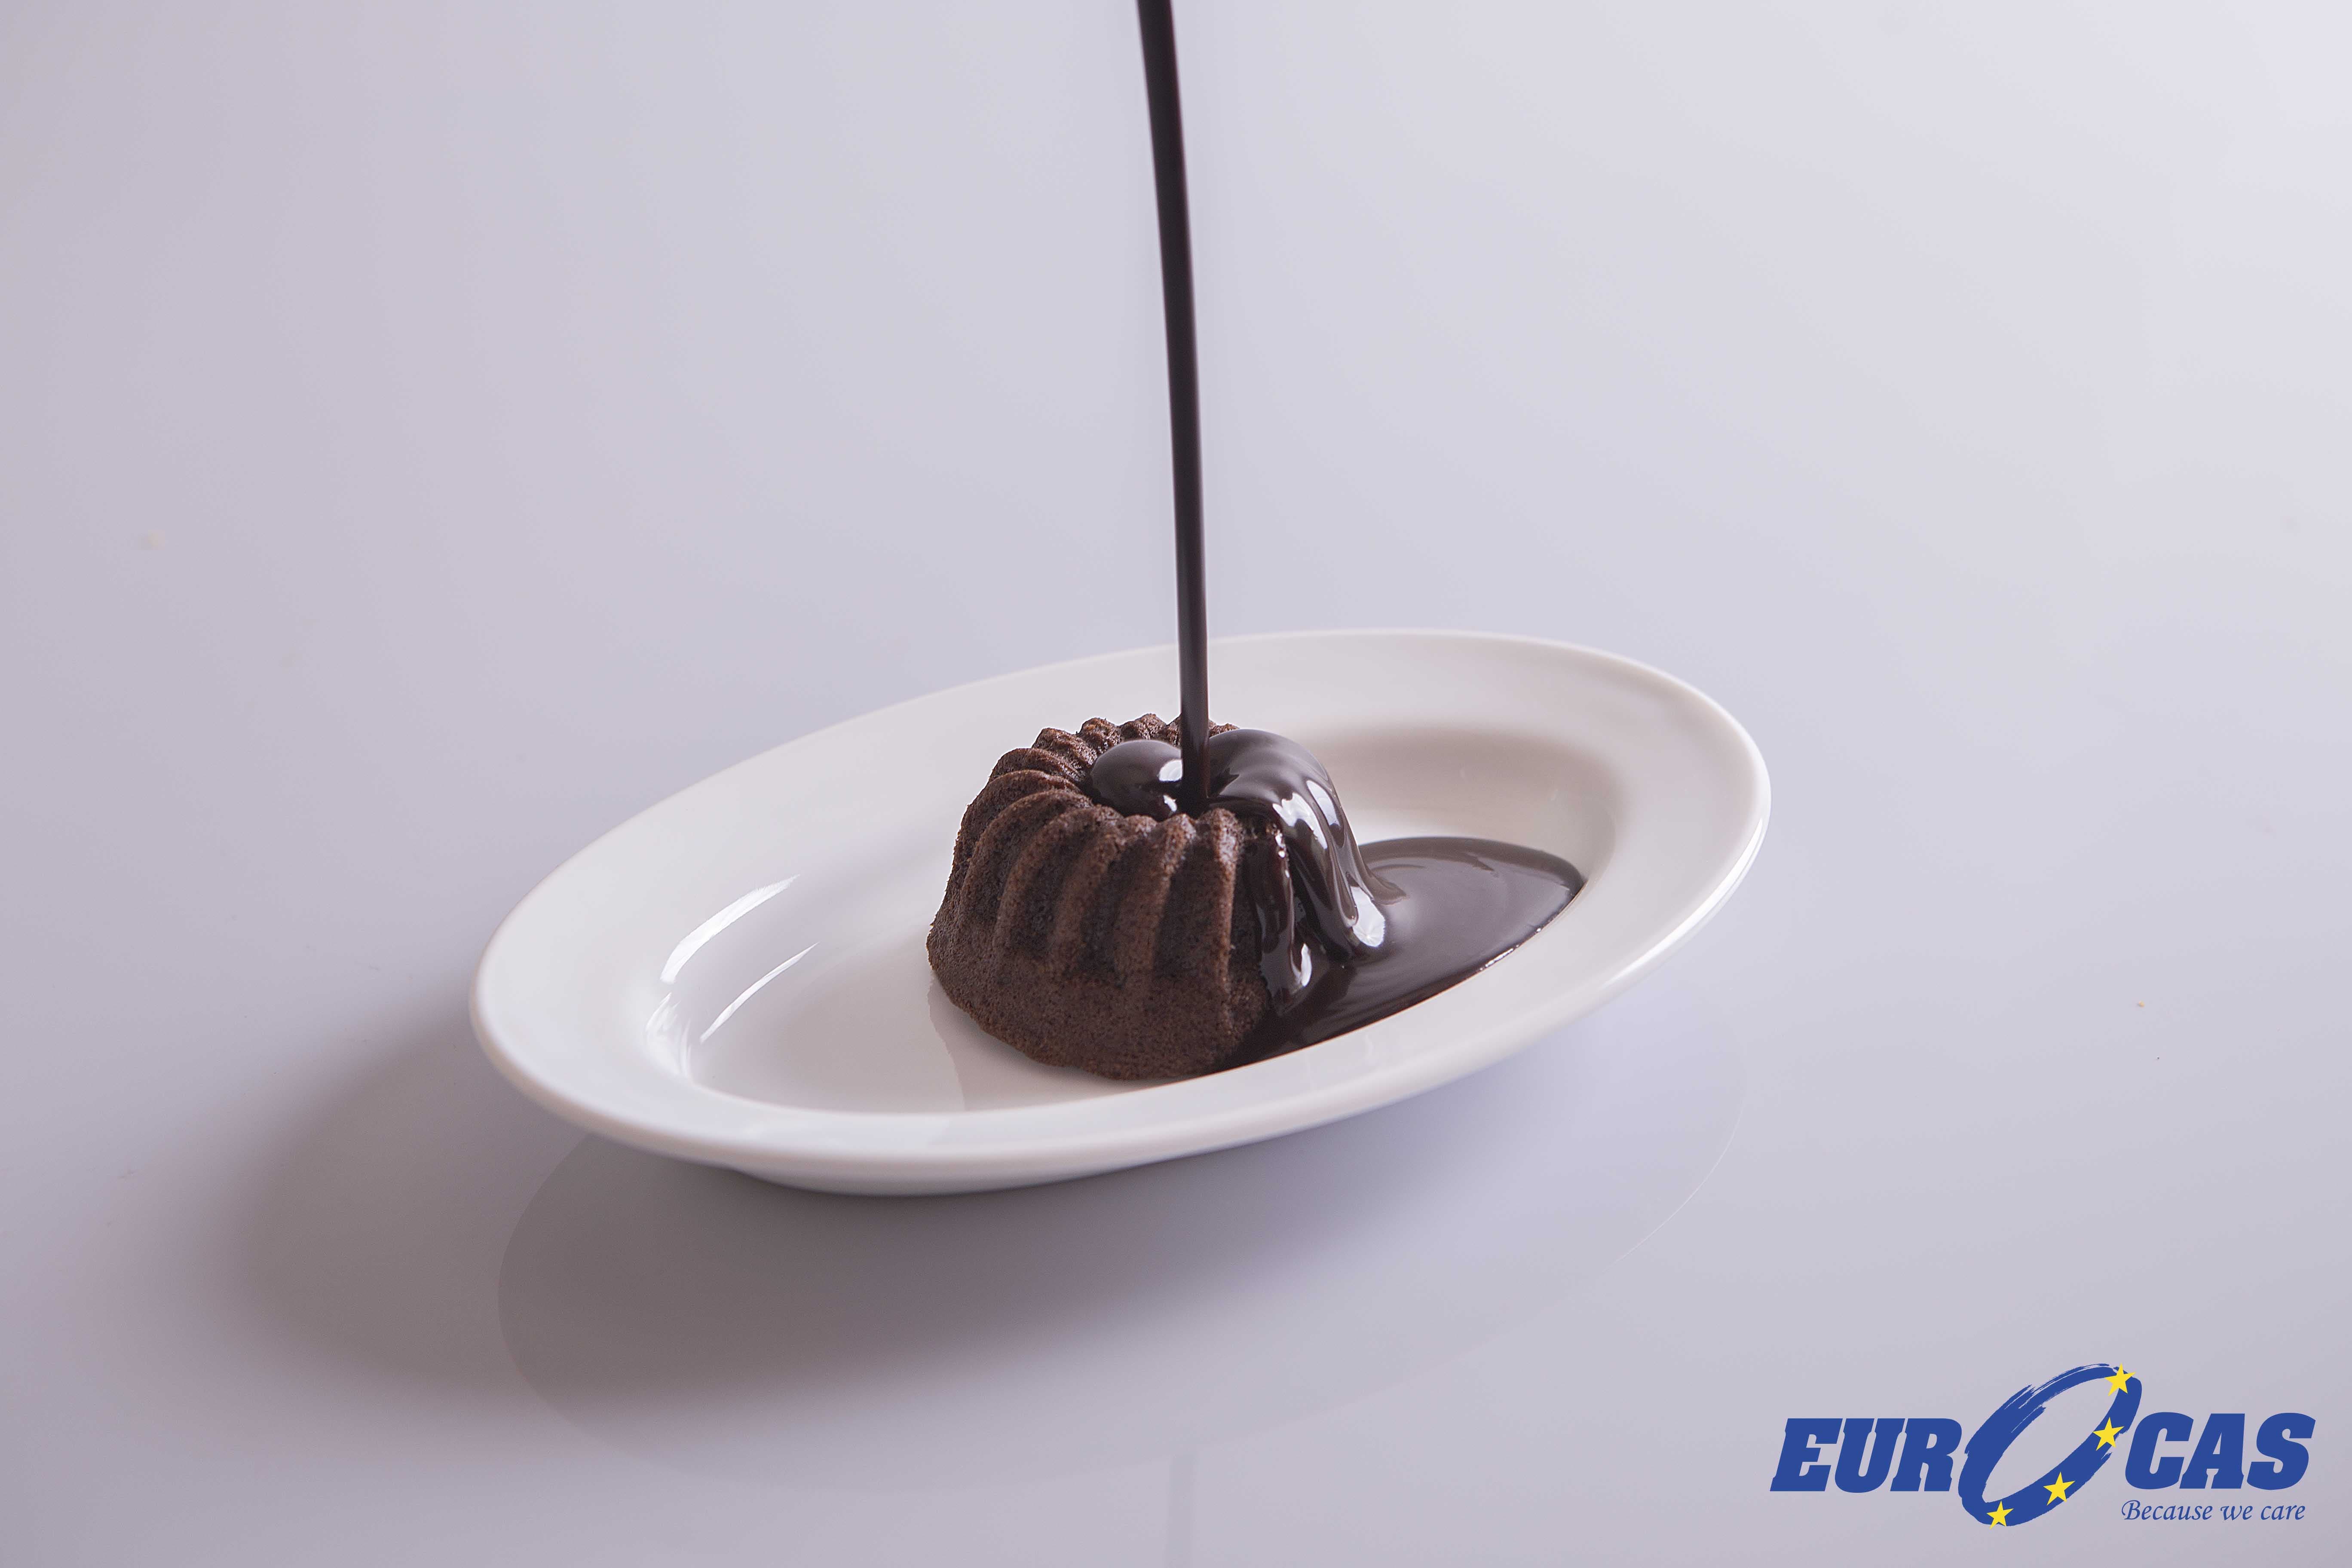 Chocolate compound coatings